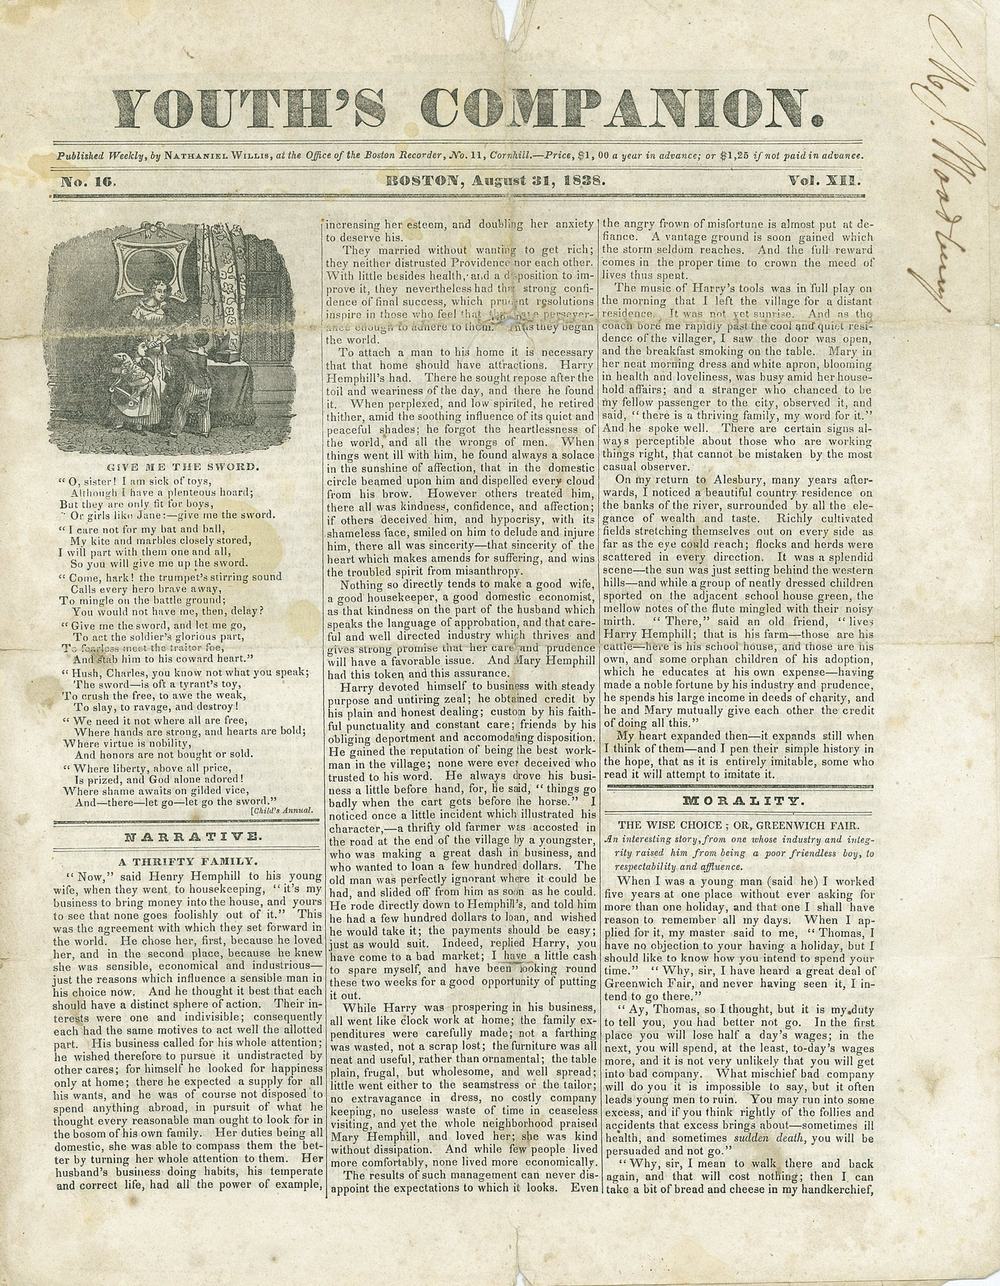 The Youth's Companion - August 31st, 1838 - Vol. 12 - No. 16